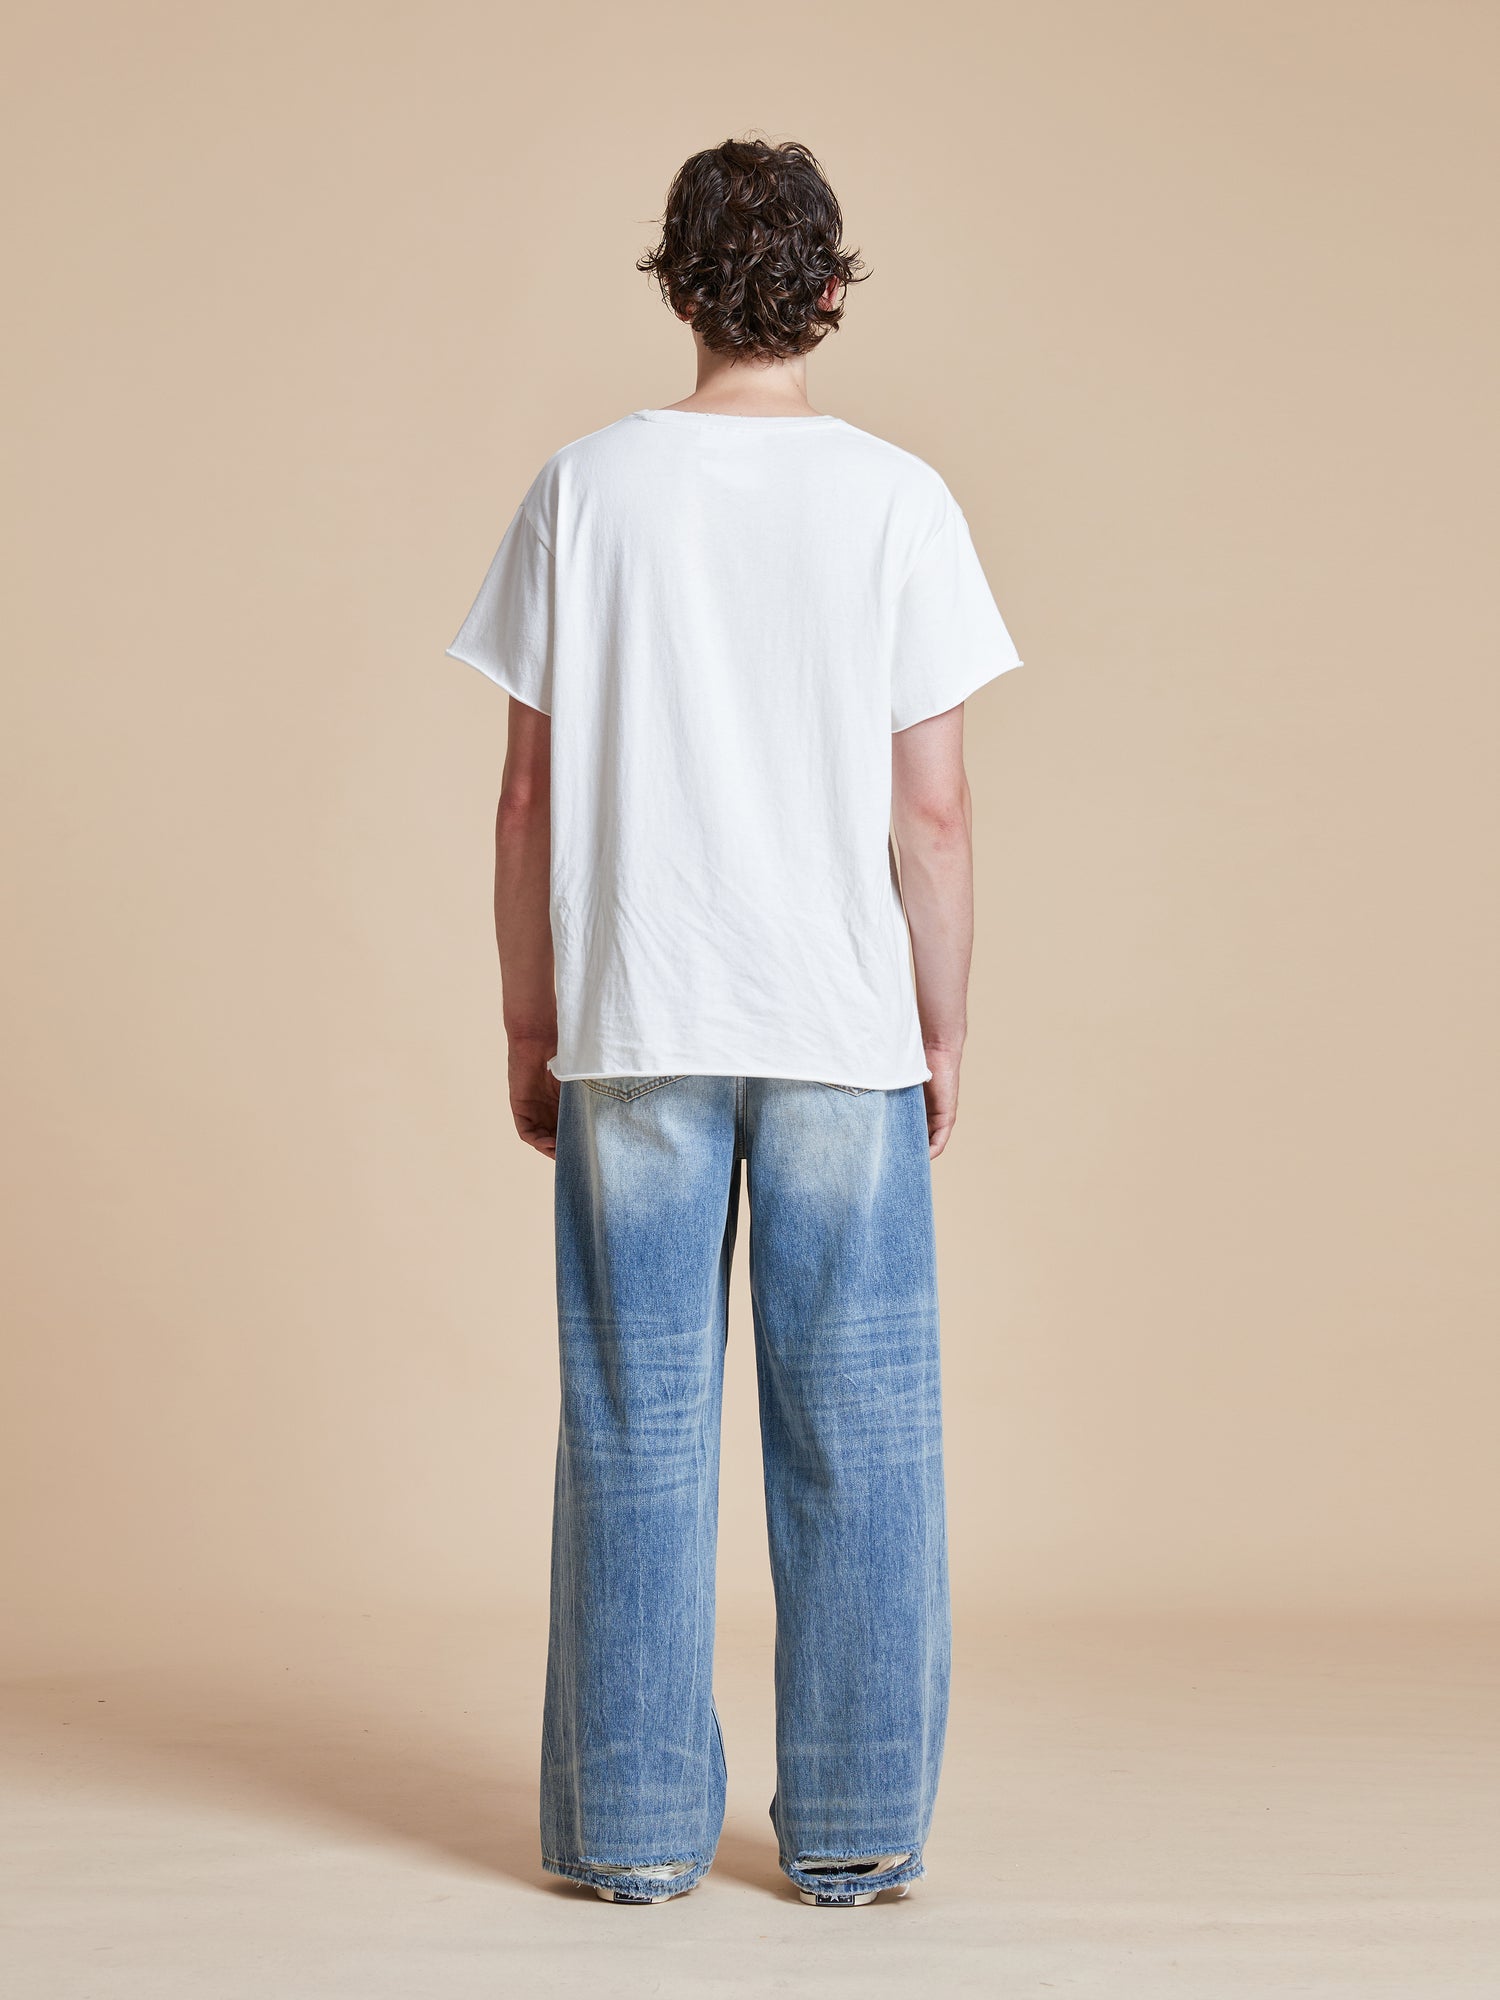 The back of a man wearing Found's Lacy Baggy Jeans with distressed hems and a white t-shirt.